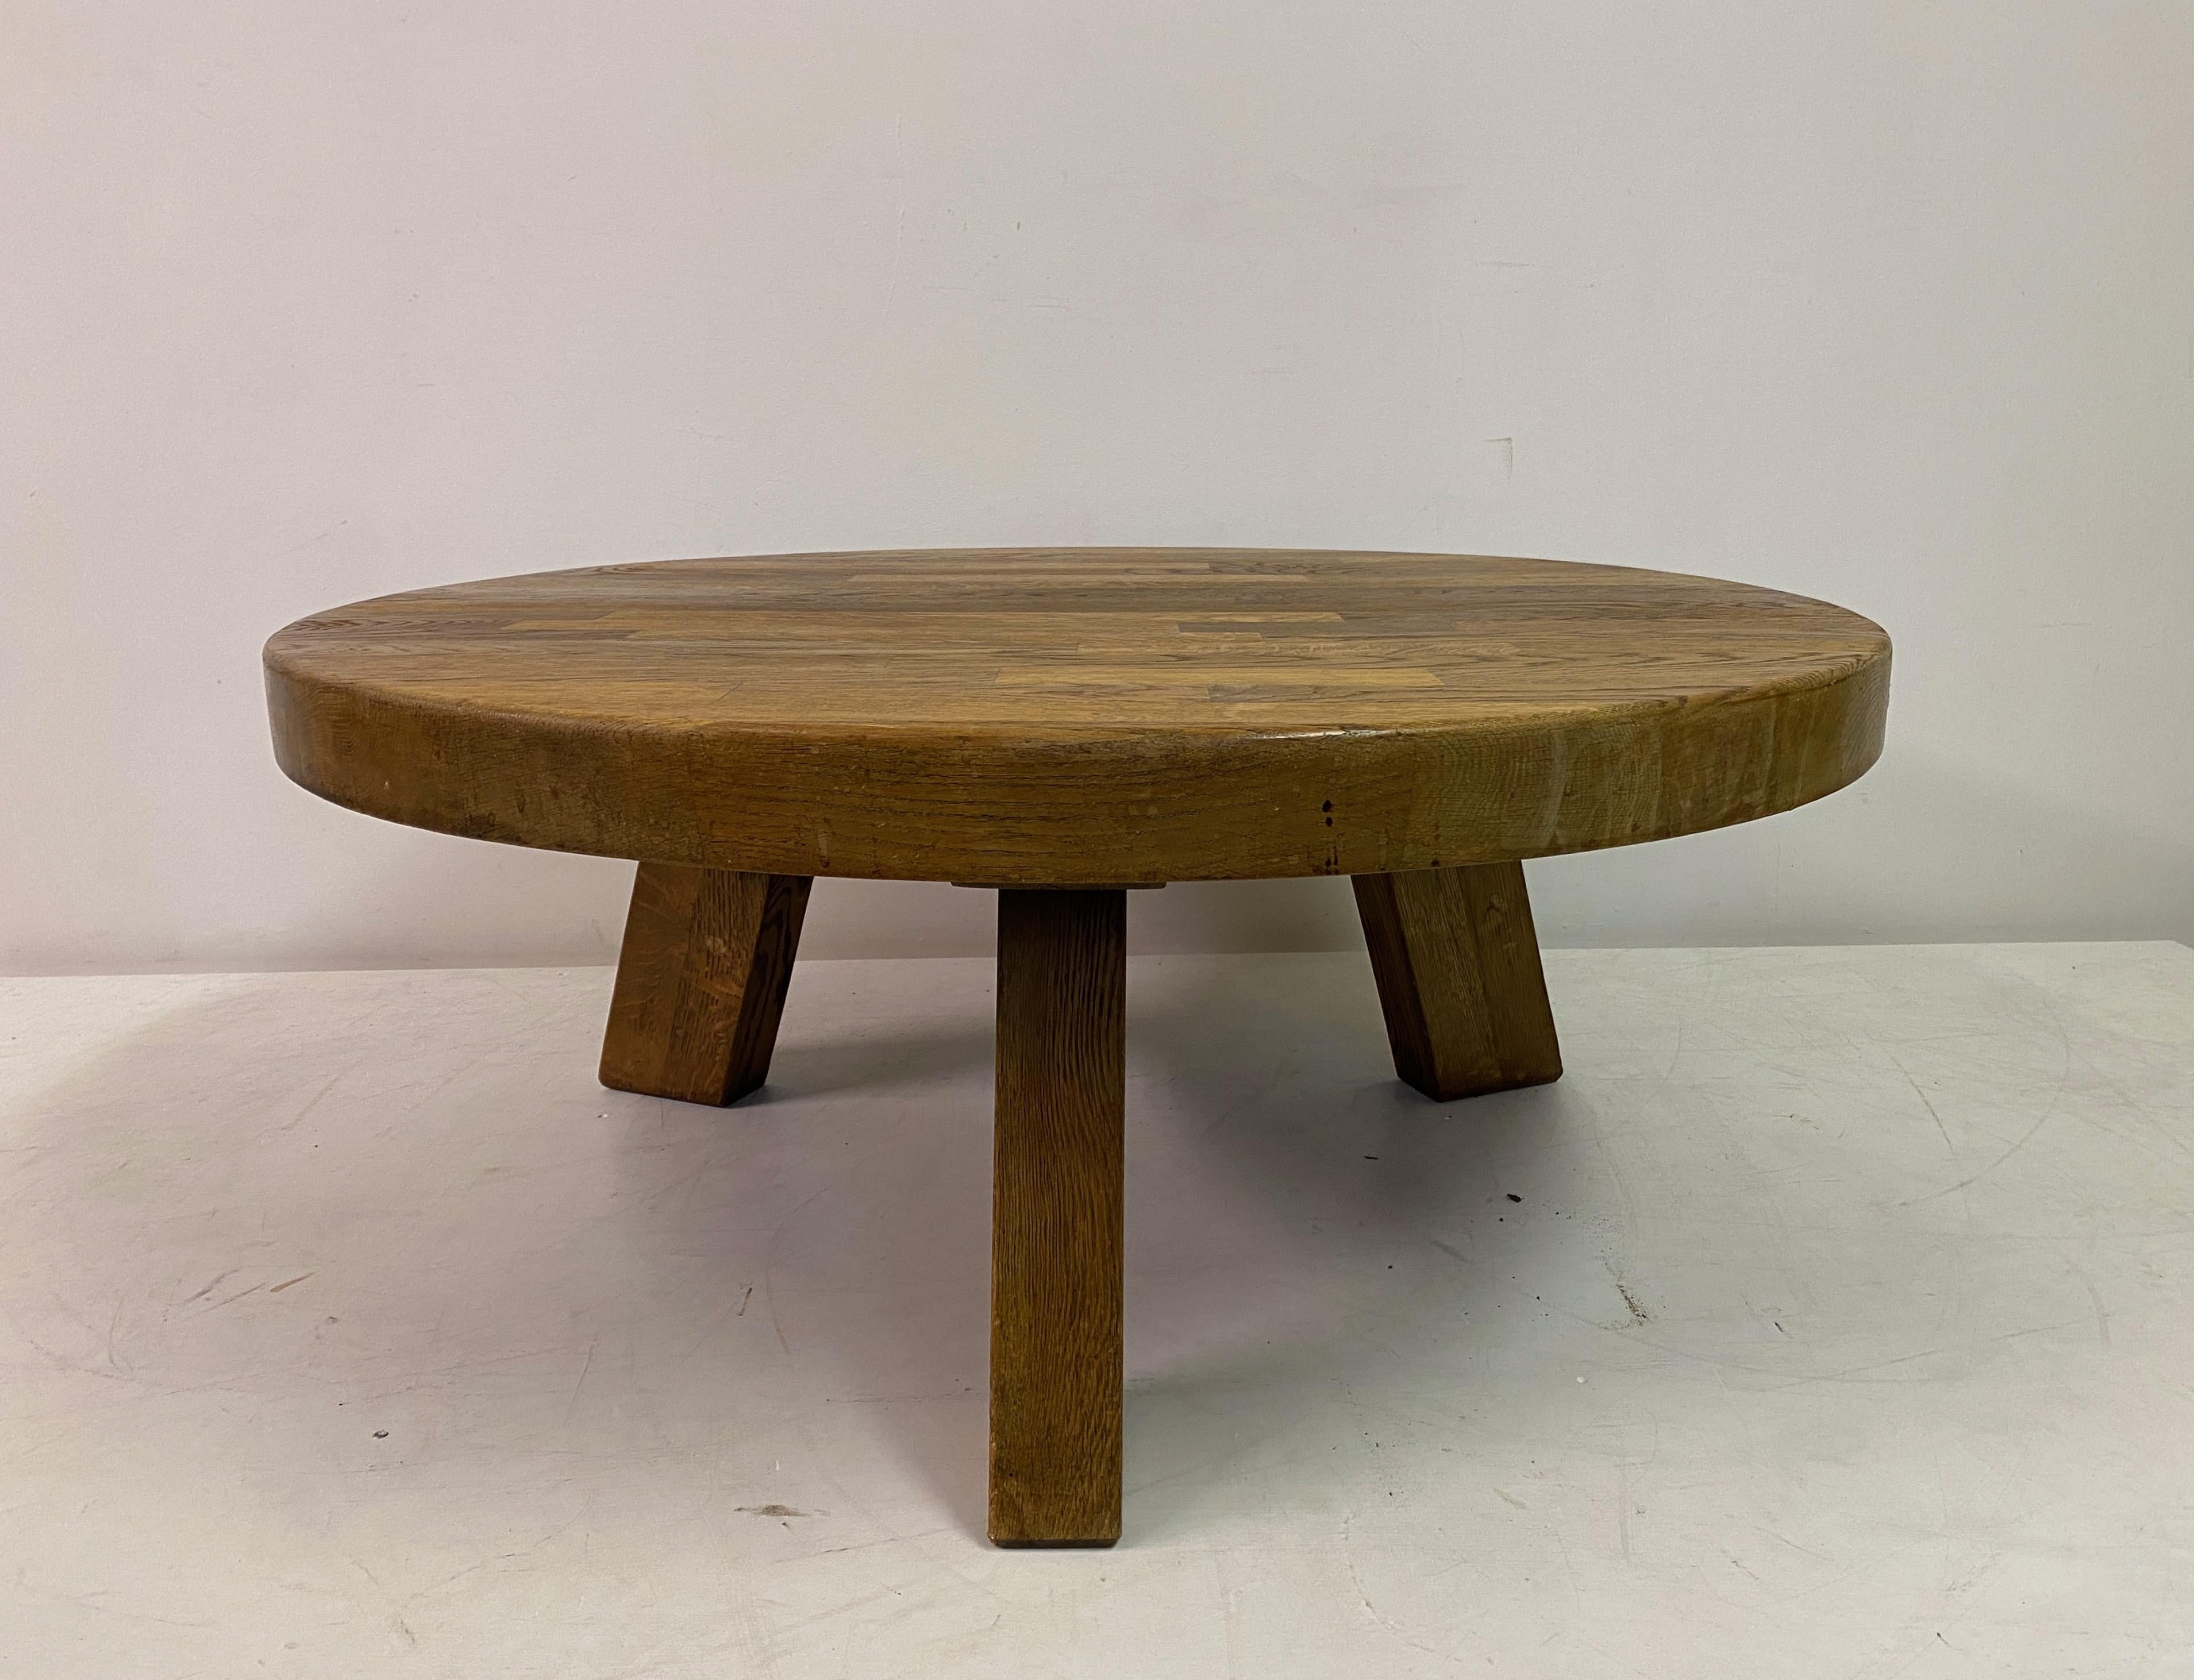 Round Brutalist Oak Coffee Table In Good Condition For Sale In London, London